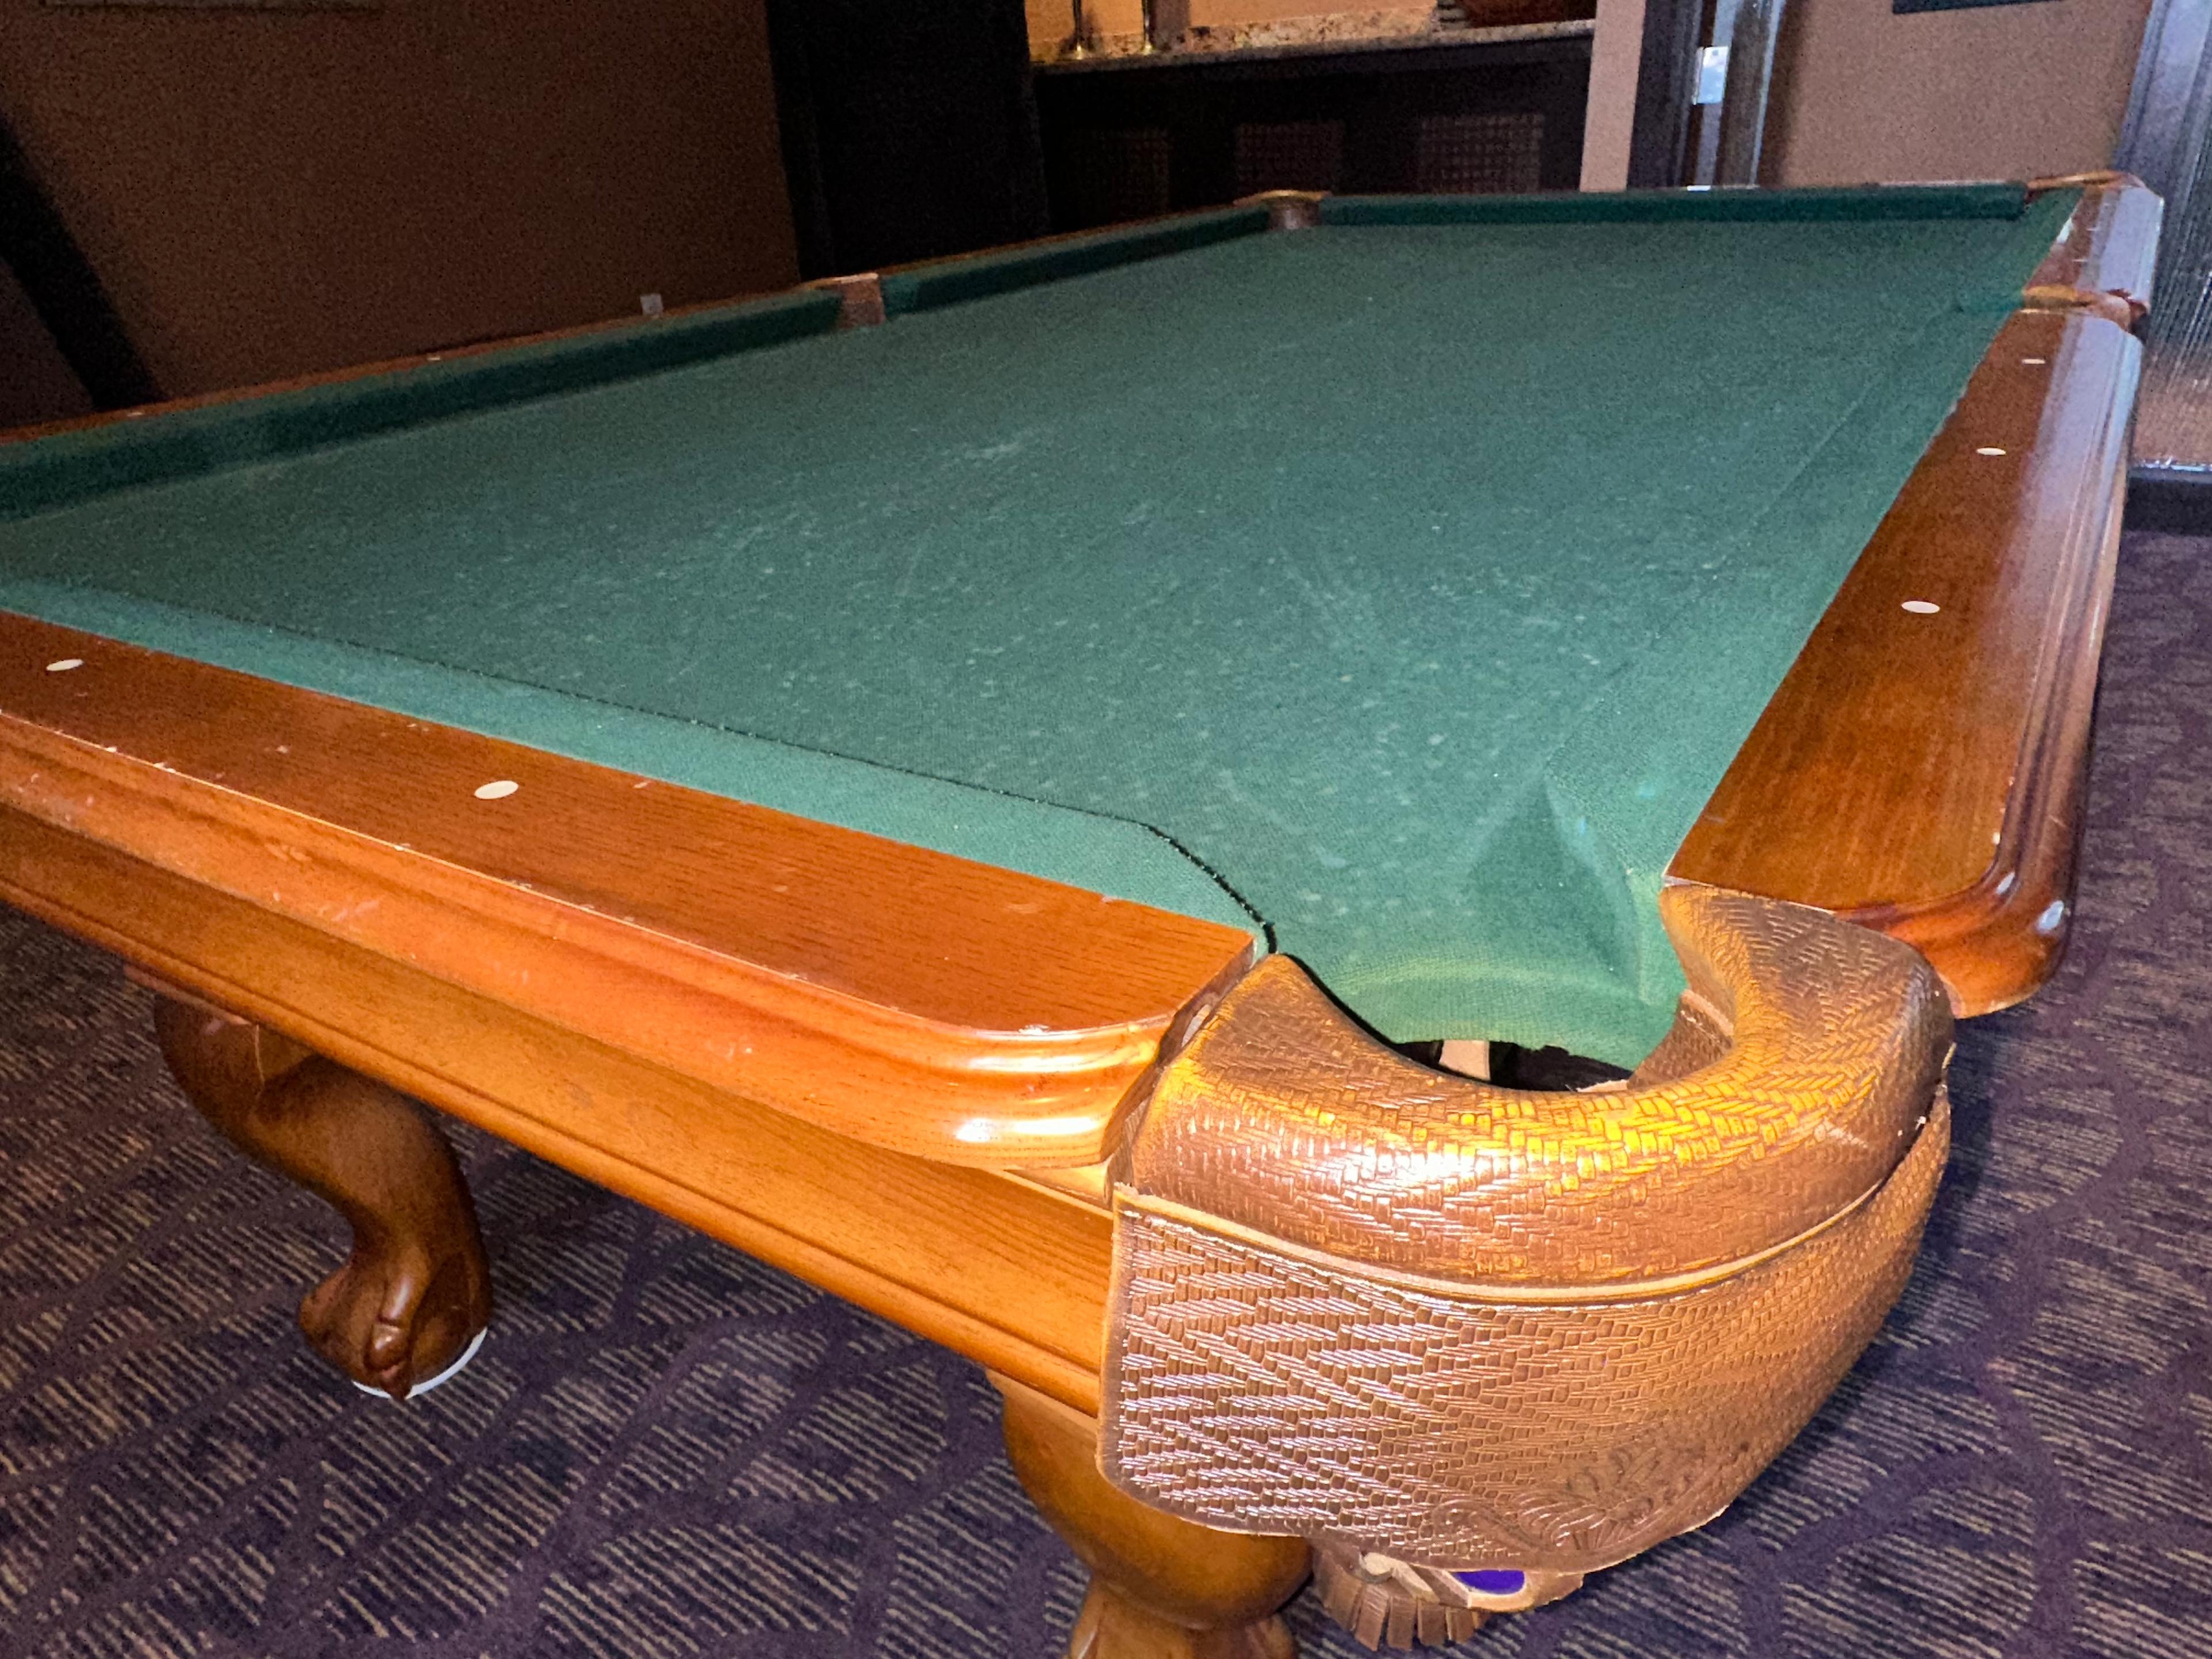 100"L x 55.5"D x 32"H Decor Solid Wood Green Felt Pool Table w/Dark Brown Leather Cover